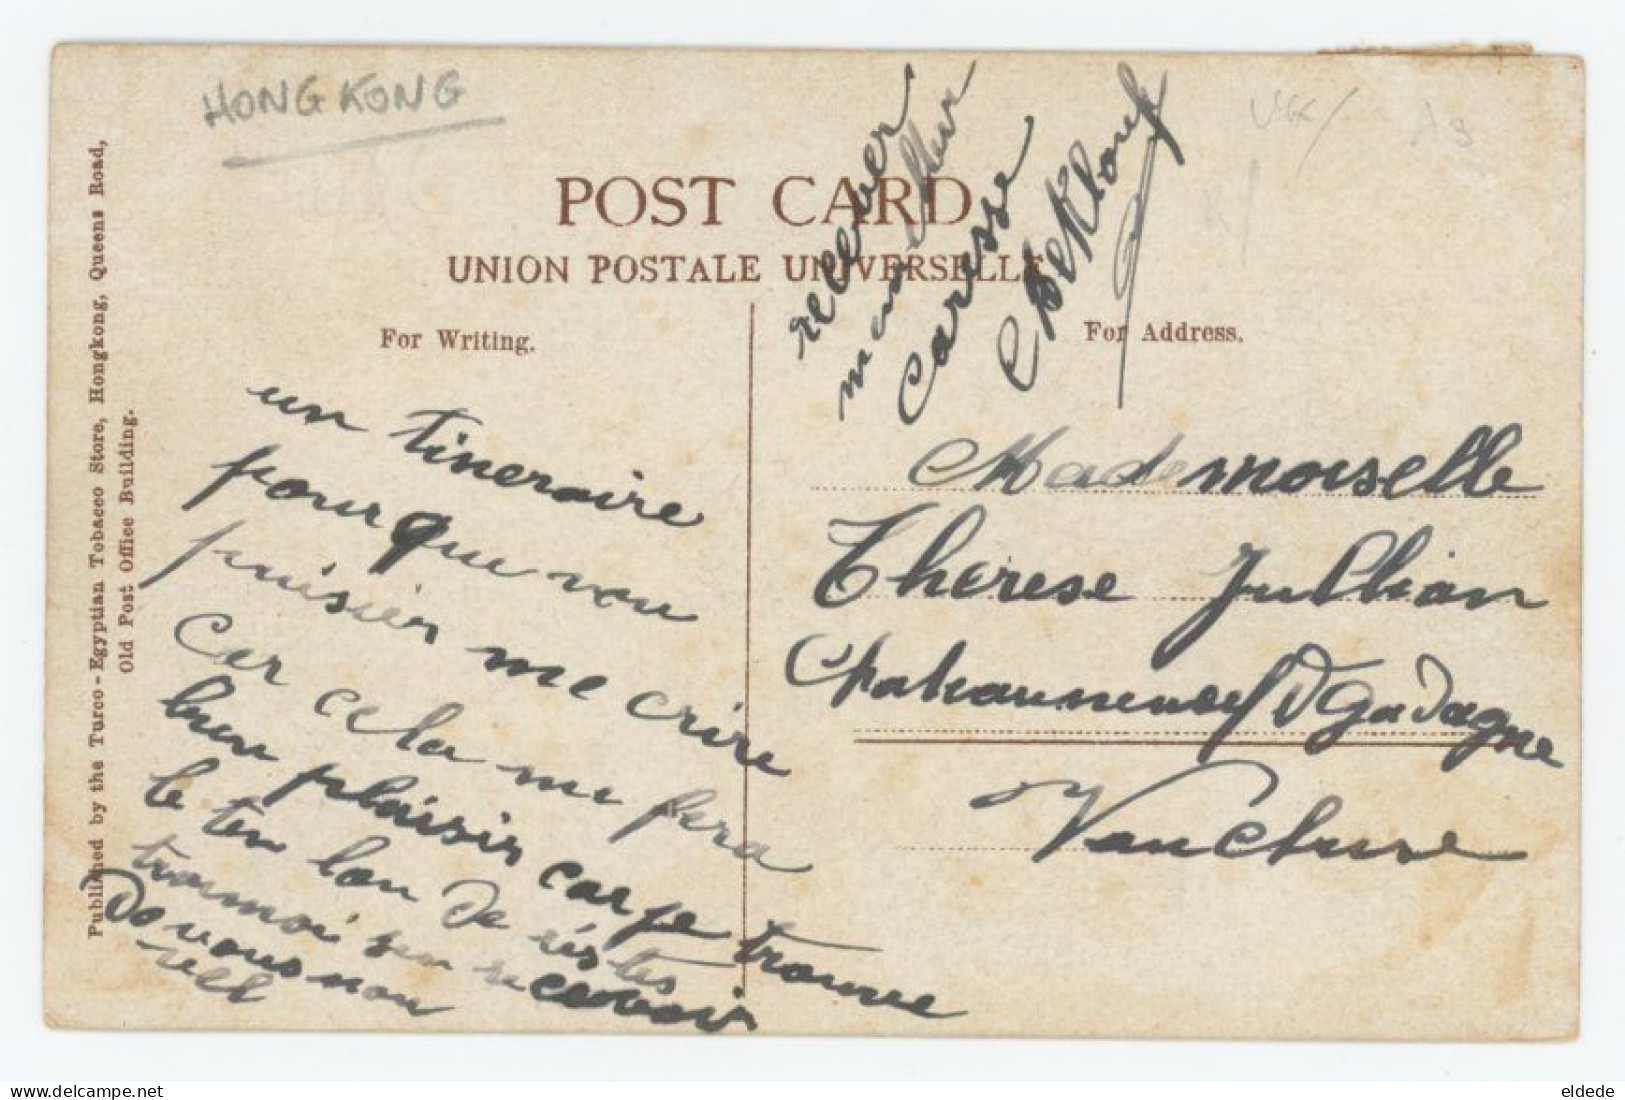 Hand Colored Hongkong Queen's Road West  Ship Postmark To Chateauneuf Gadagne Vaucluse - China